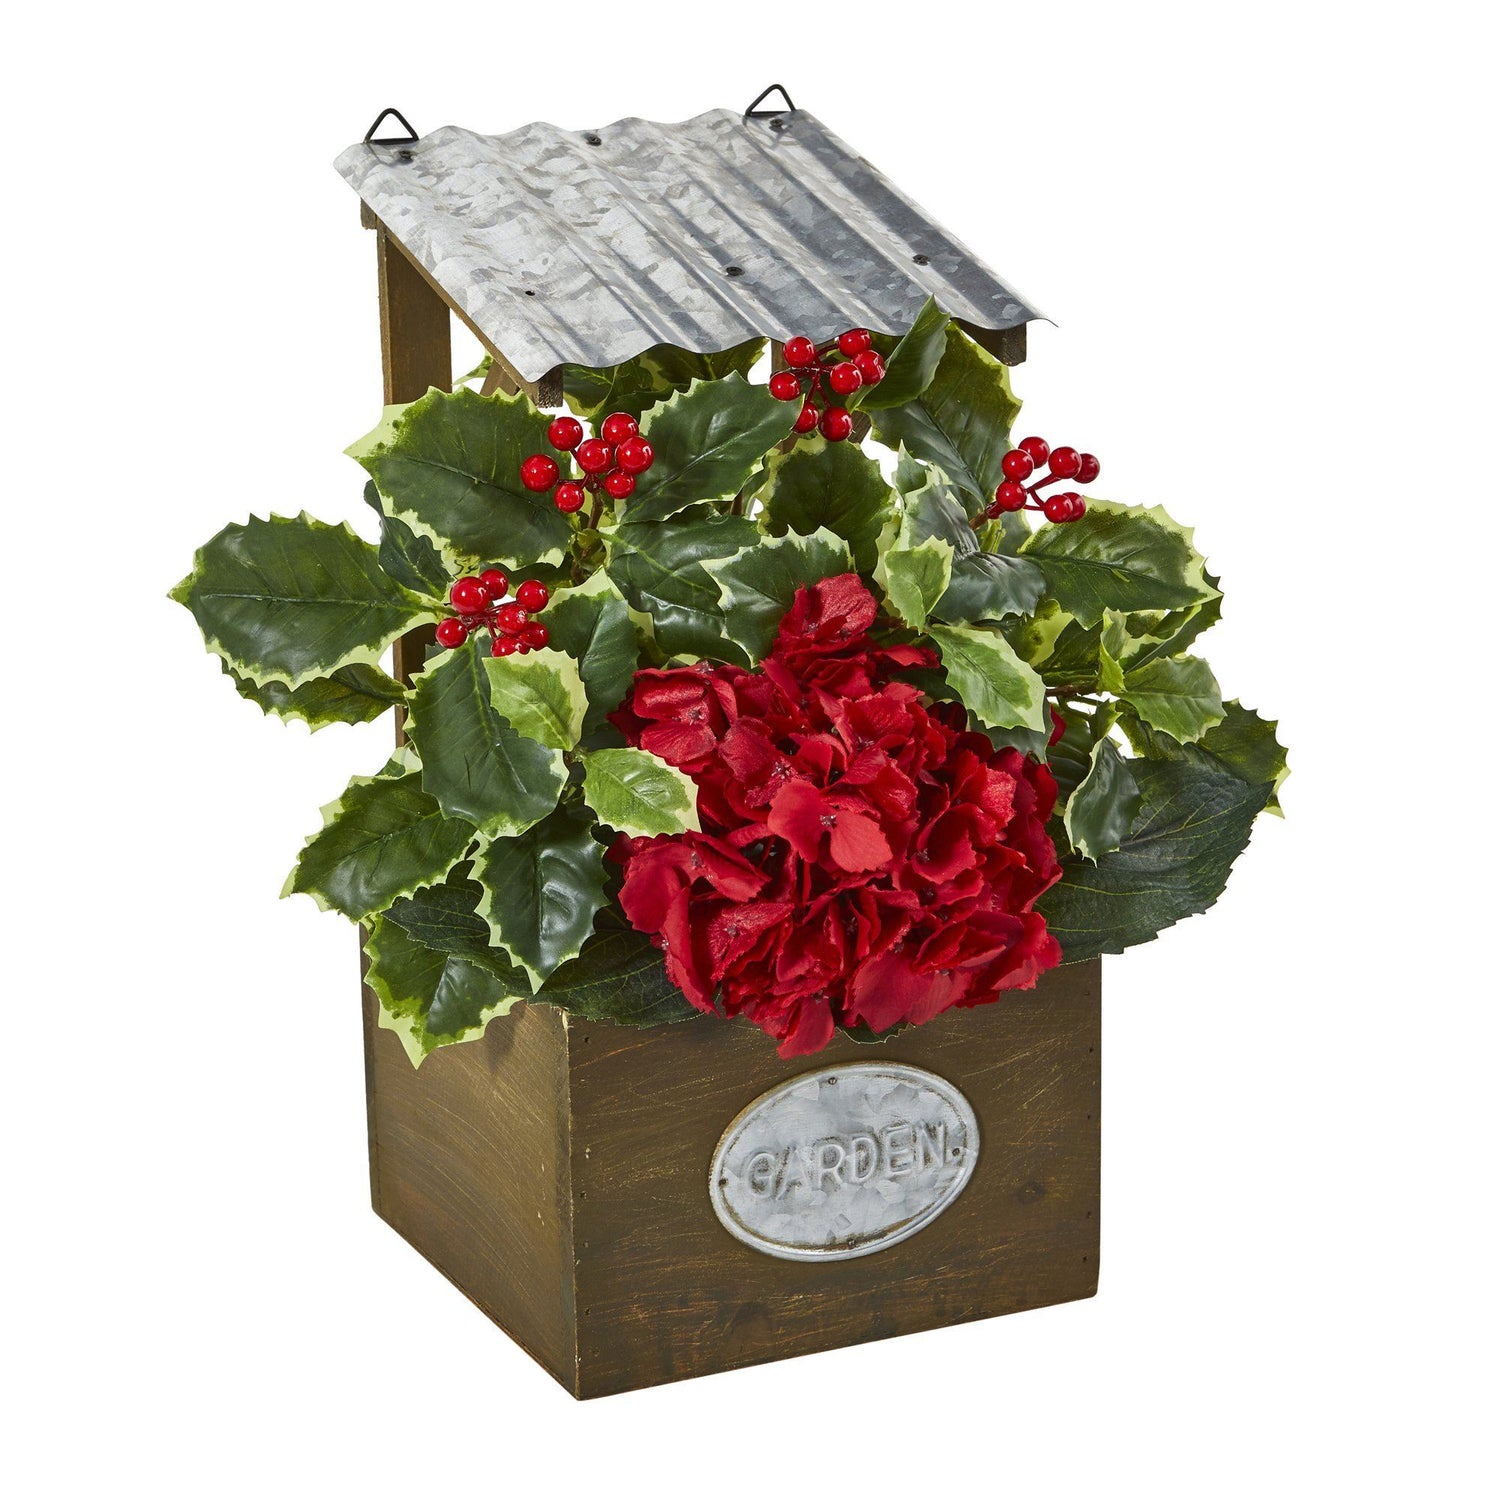 14” Hydrangea and Holly Leaf Artificial Arrangement in Tin Roof Planter